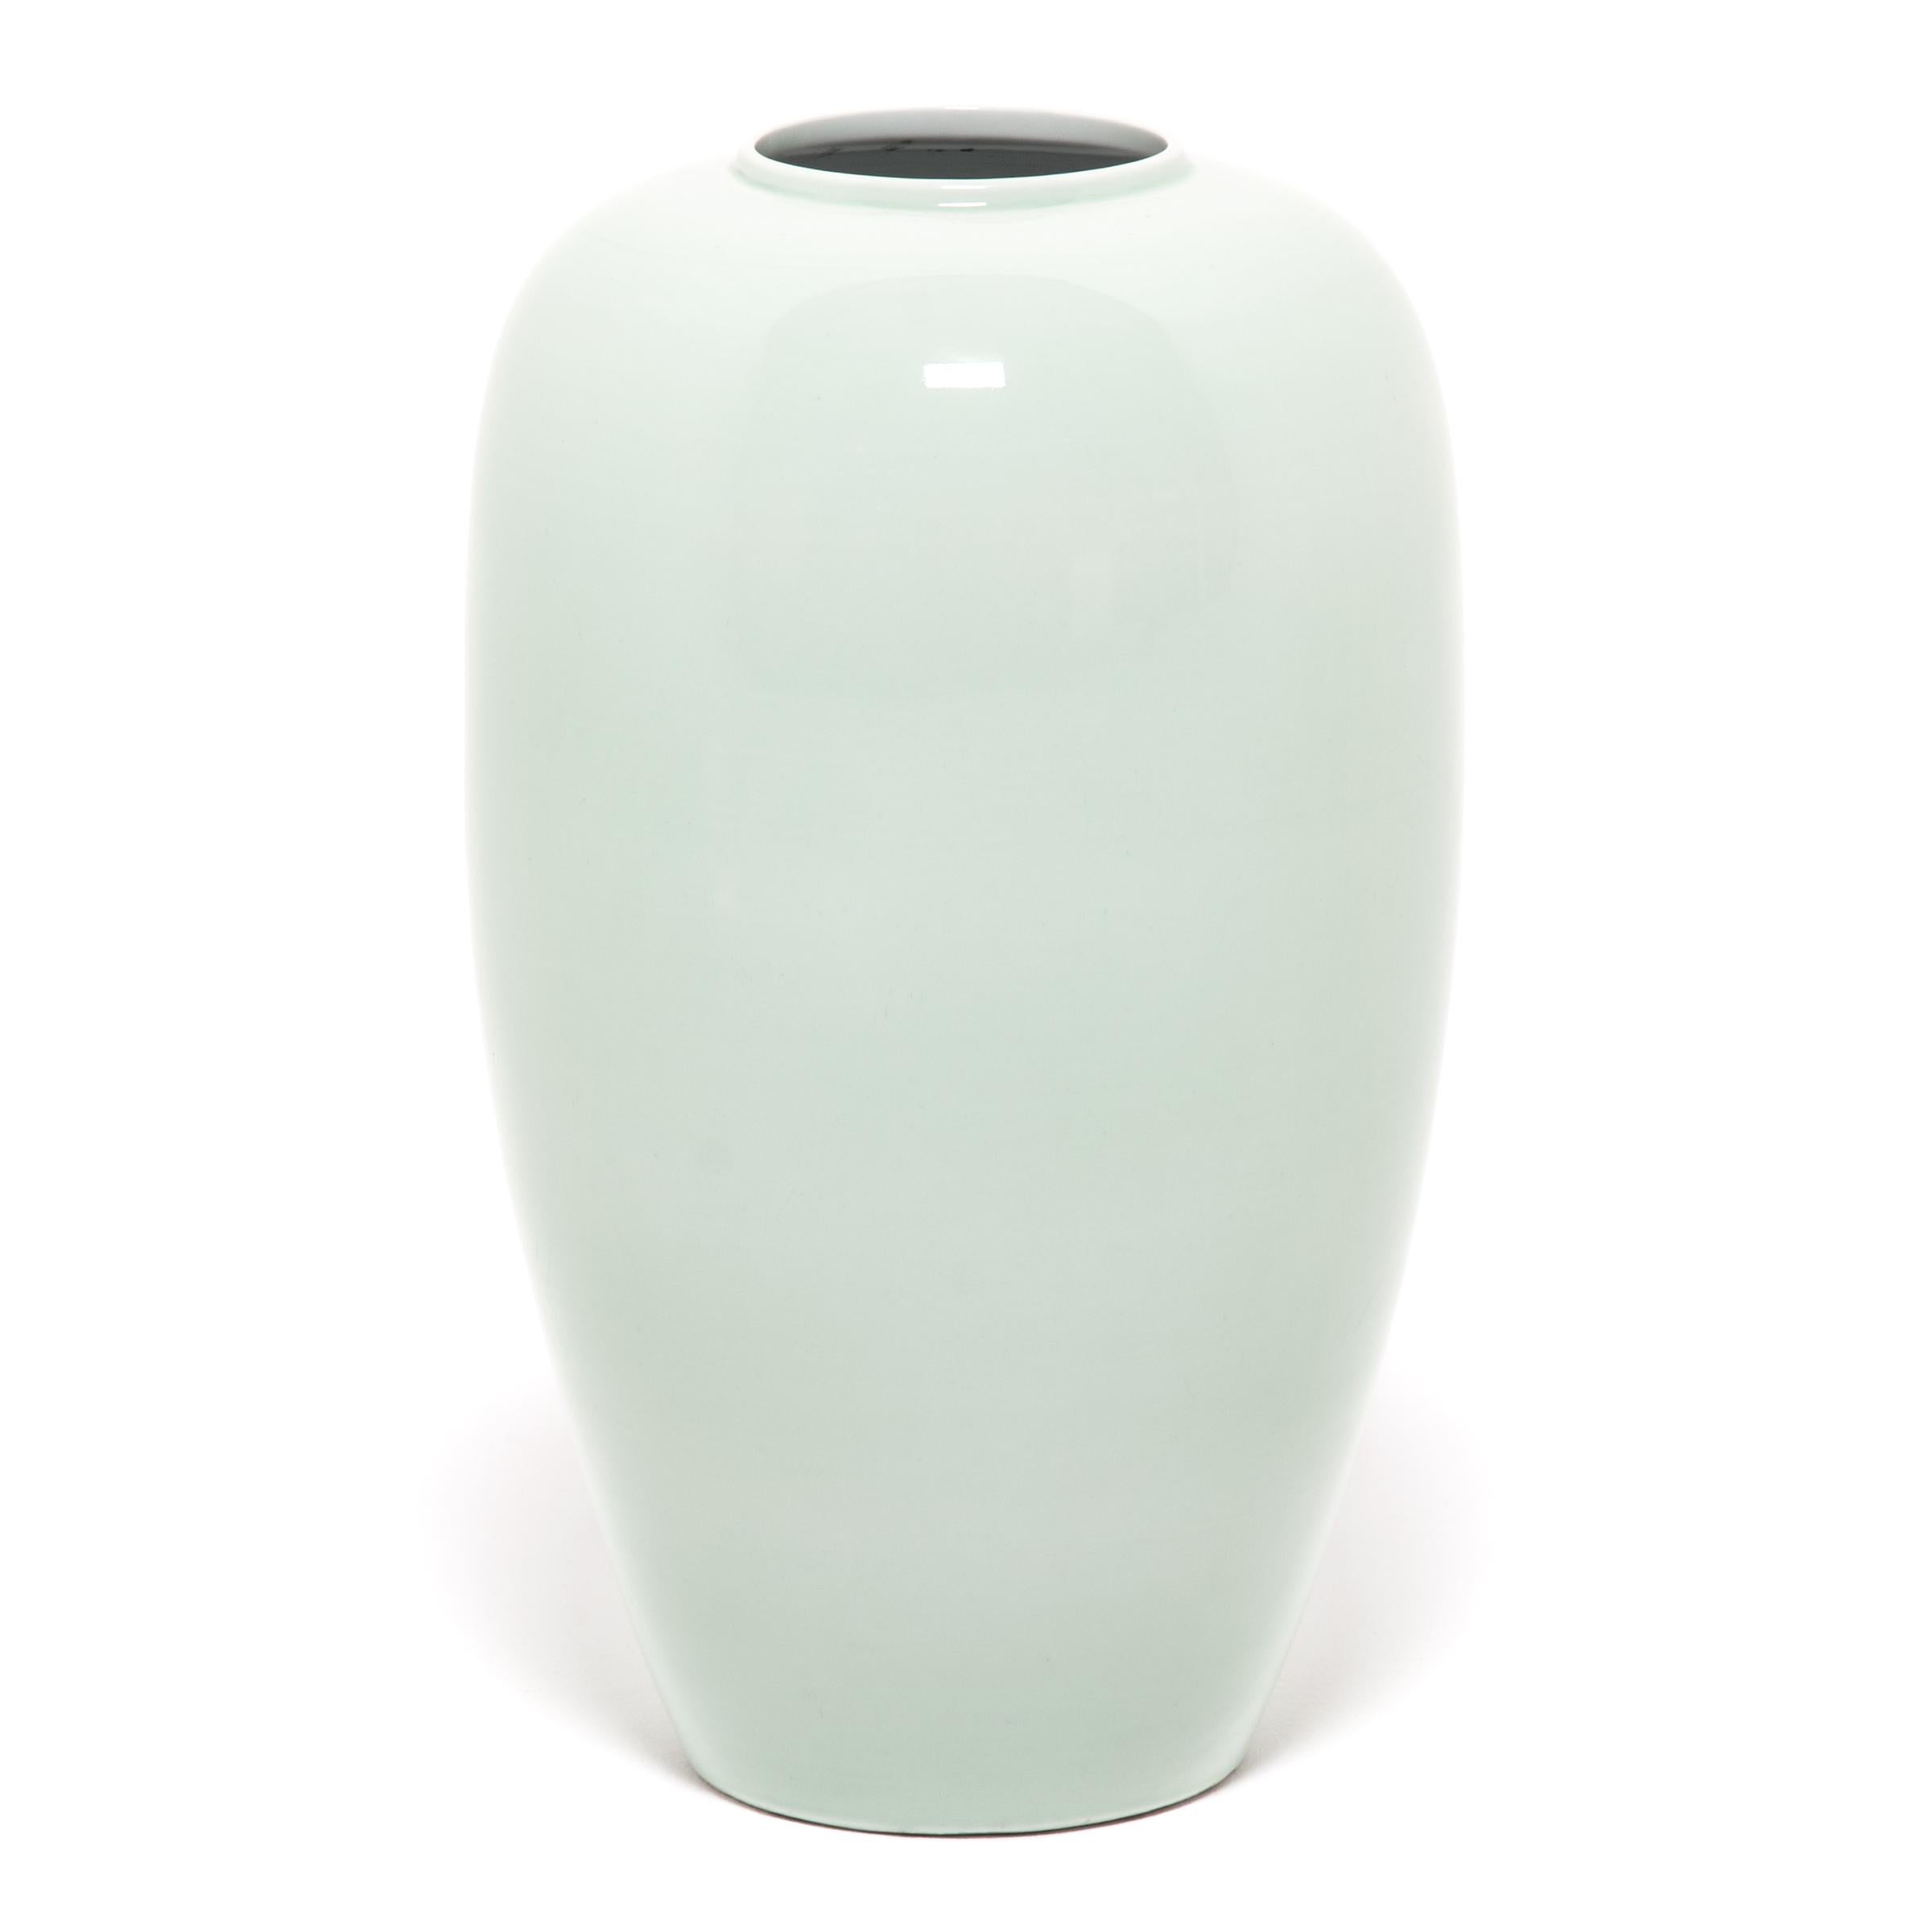 For centuries, collectors have coveted fine celadon ceramics like this elegant contemporary tapered vase. The glazing process is complex: an artisan covered the vase in liquid iron-rich clay, and then with a glaze that reacts to the iron to create